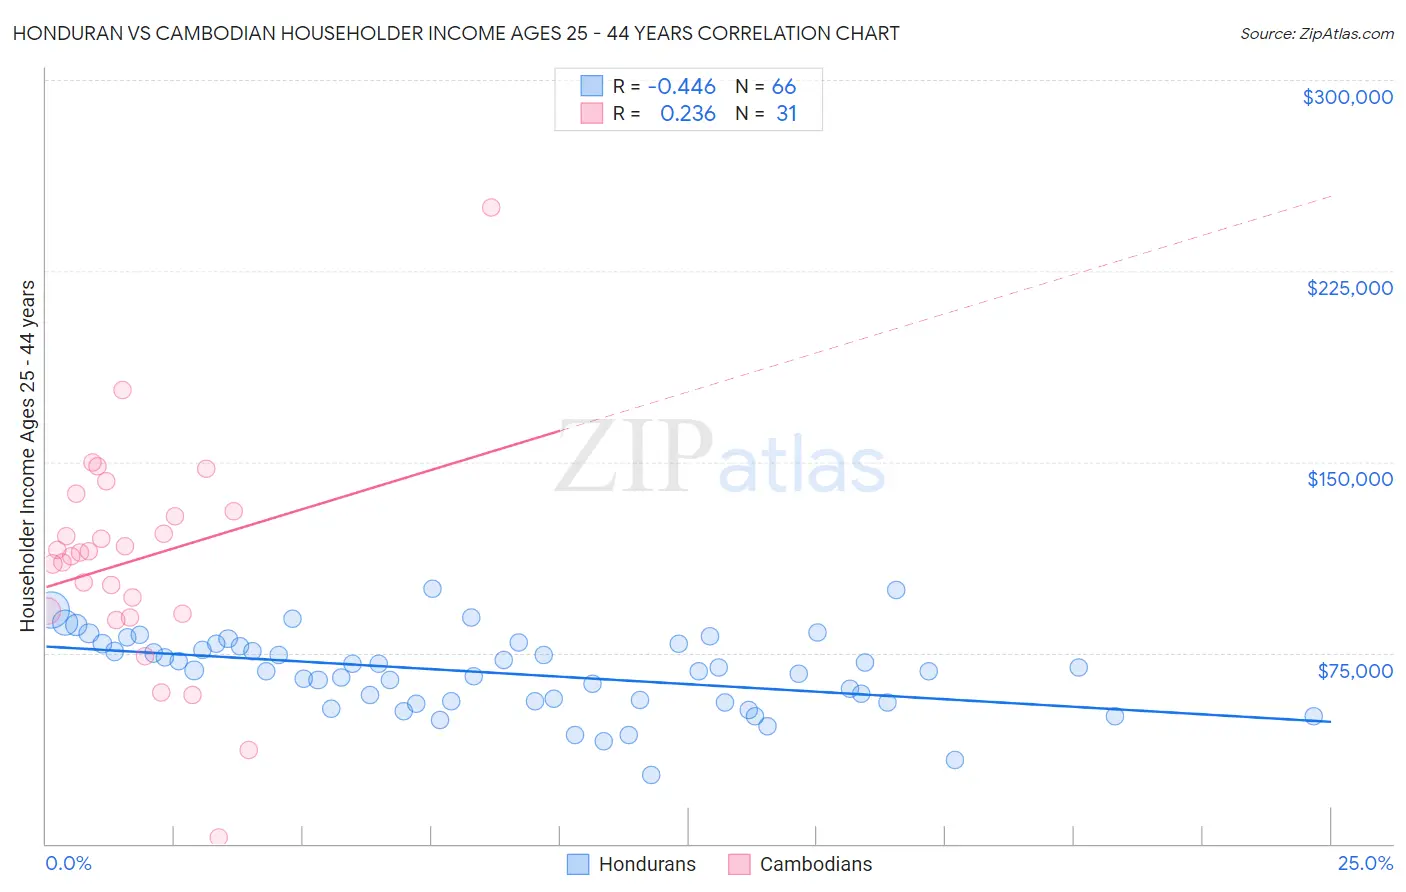 Honduran vs Cambodian Householder Income Ages 25 - 44 years